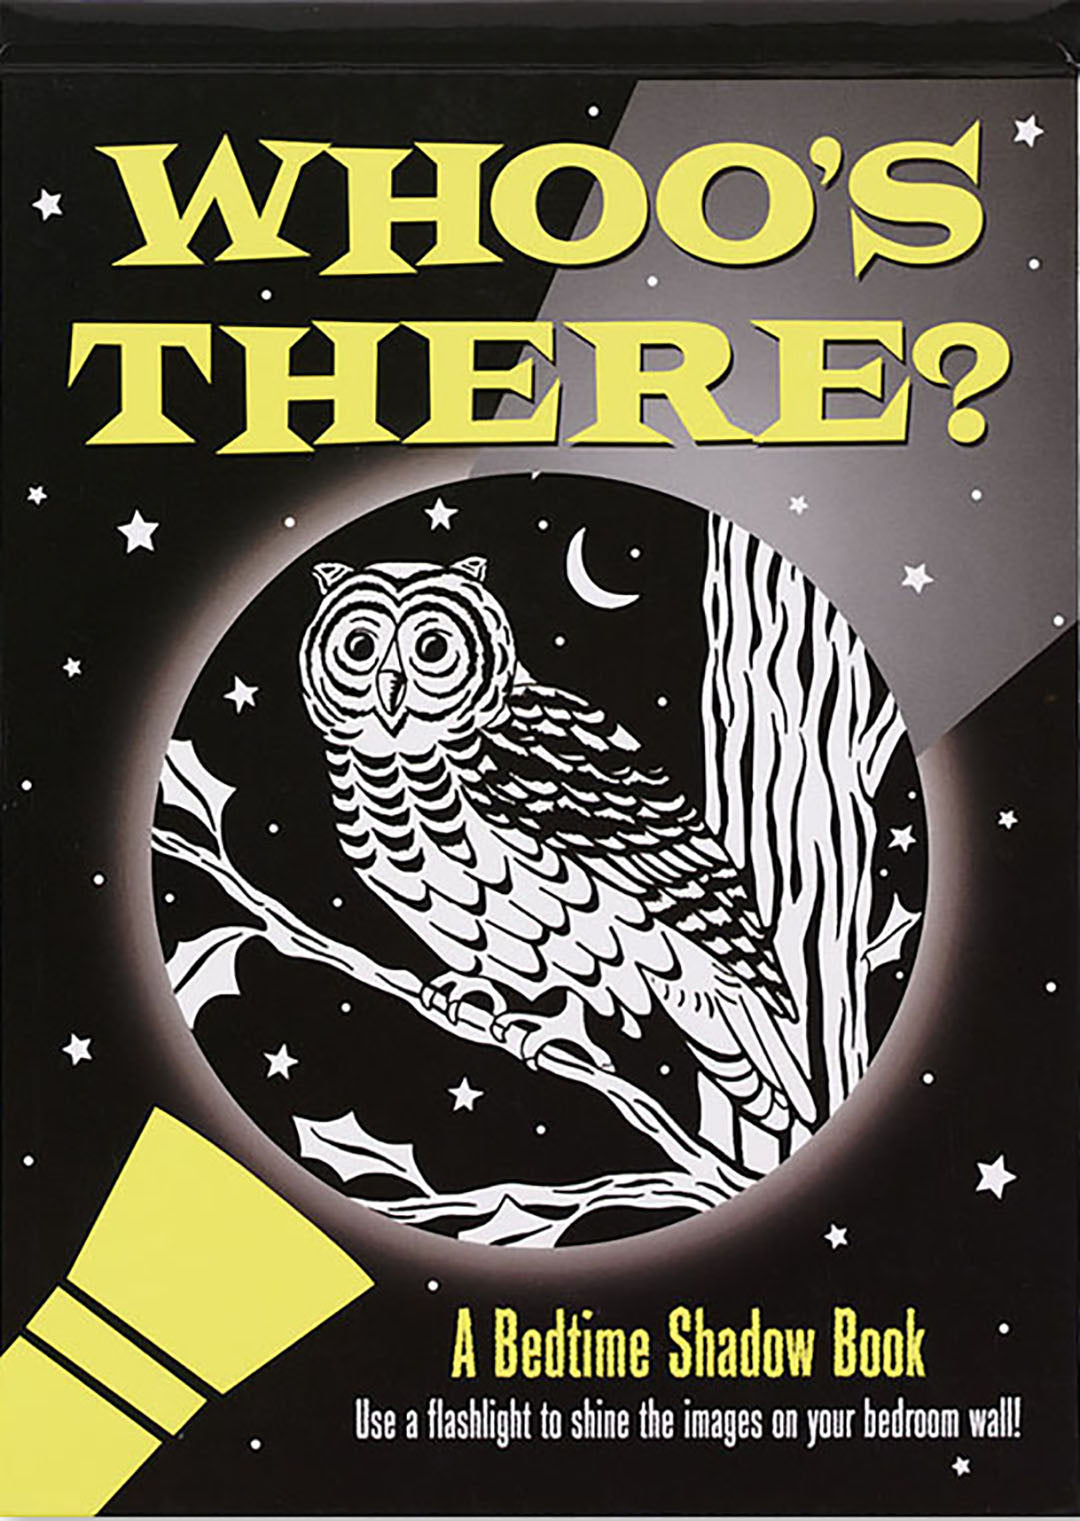 Soothe little ones' nighttime fears with this unique bedtime book! Whoo's There? offers gentle rhymes about six nighttime creatures -- an owl, a raccoon, fireflies, and more.